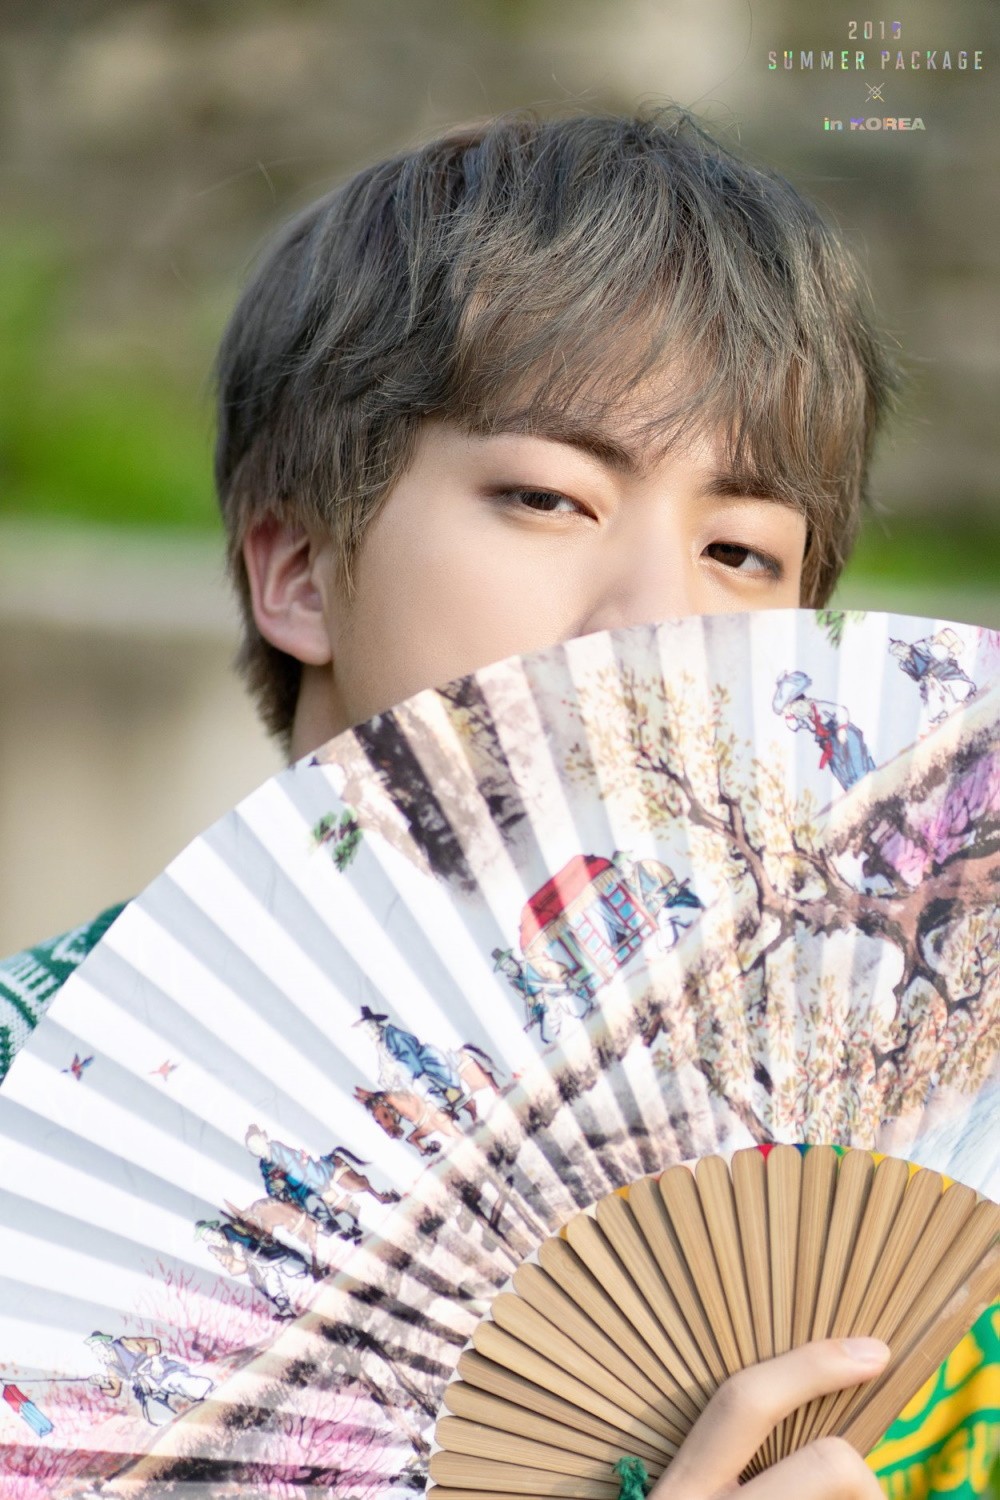 BTS reveal preview images for '2019 Summer Package in Korea 